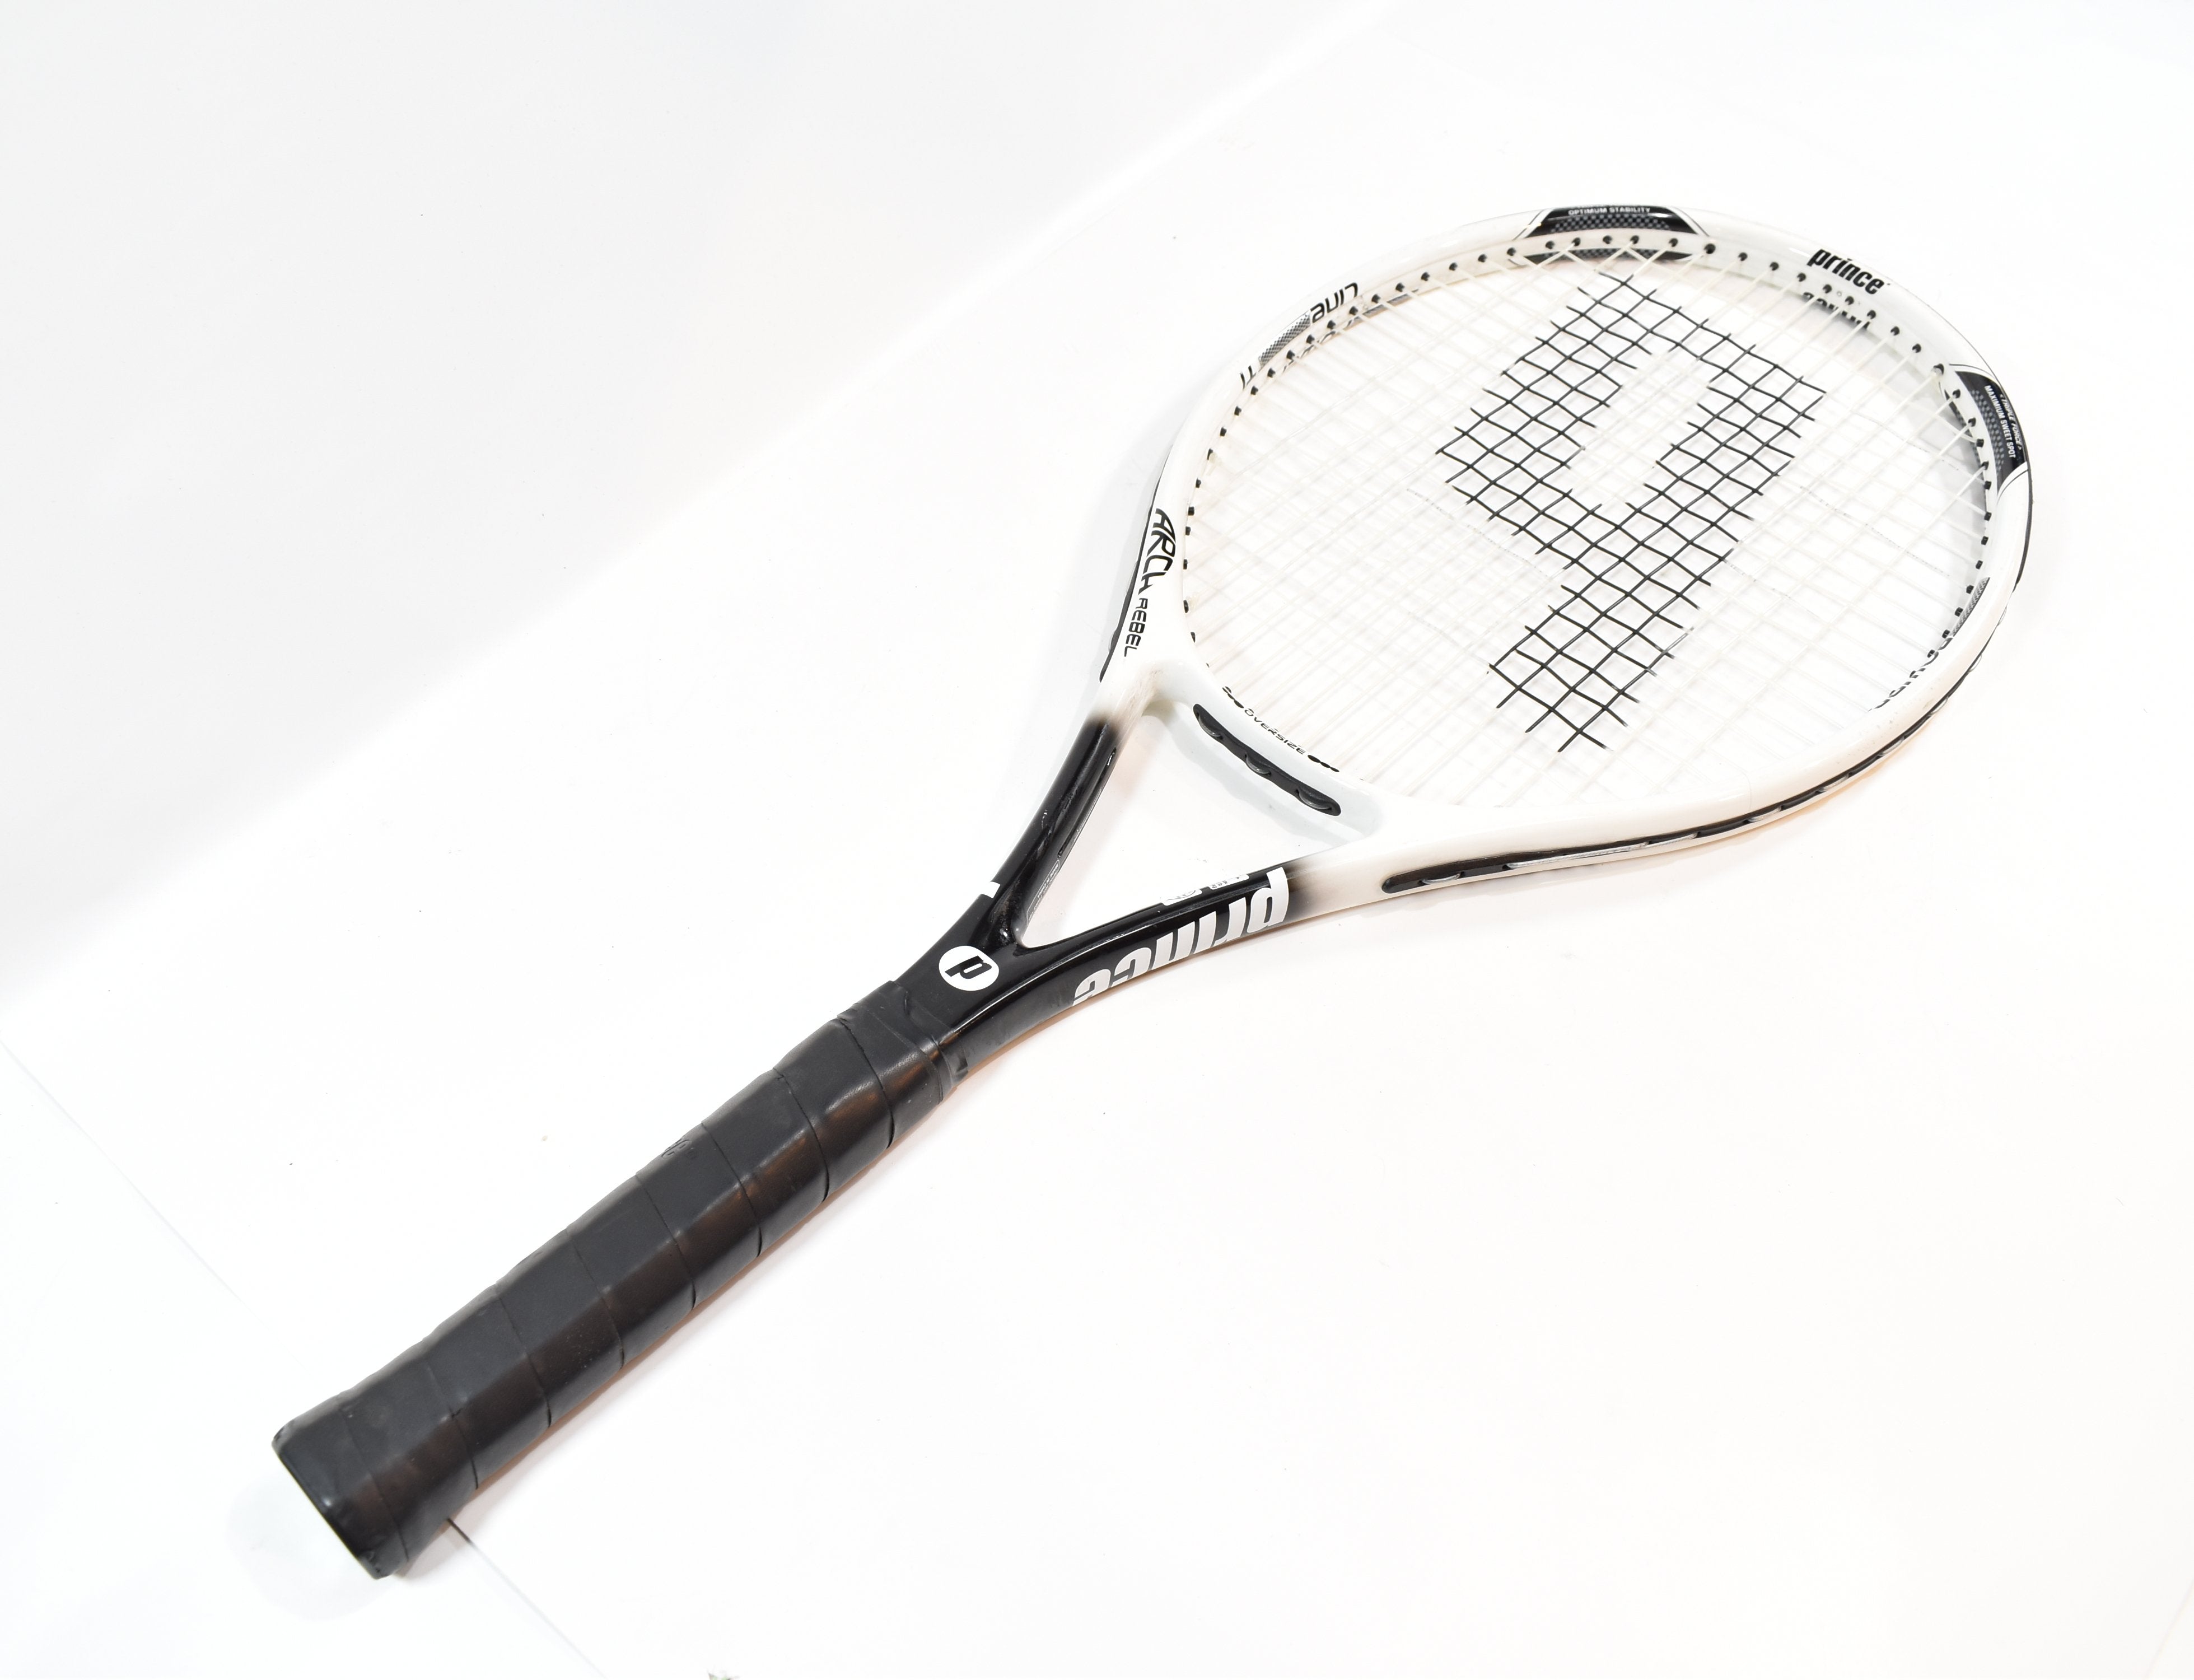 Prince Arch Rebel Racquet White and black used TM10c-107